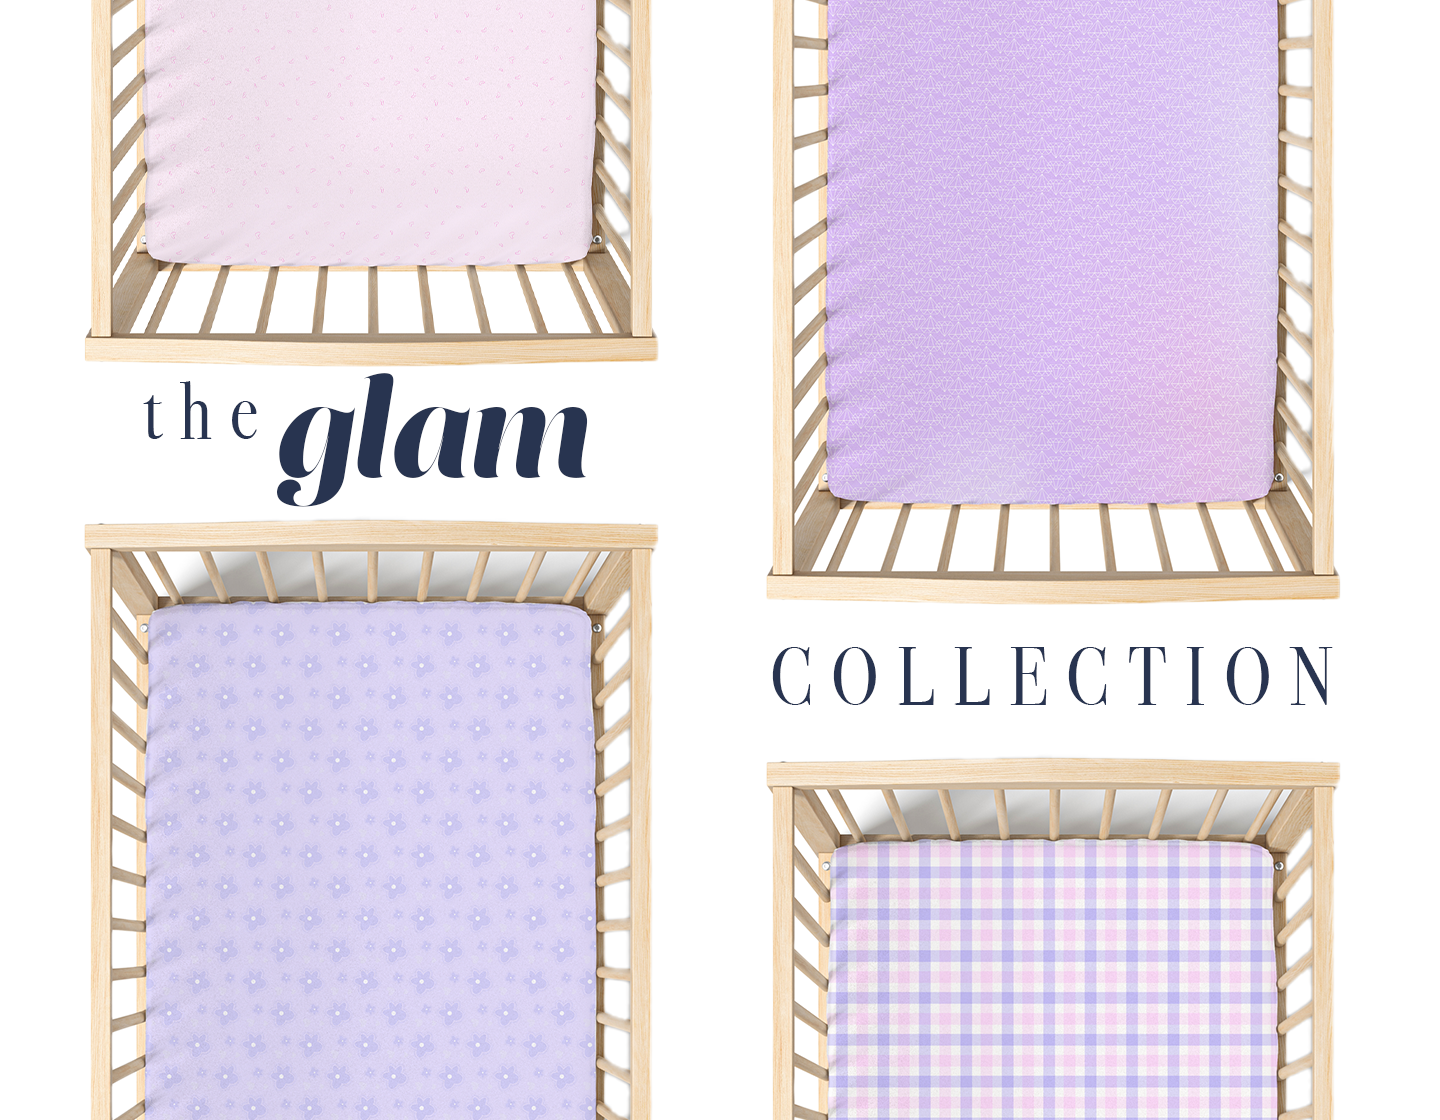 Glam Collection